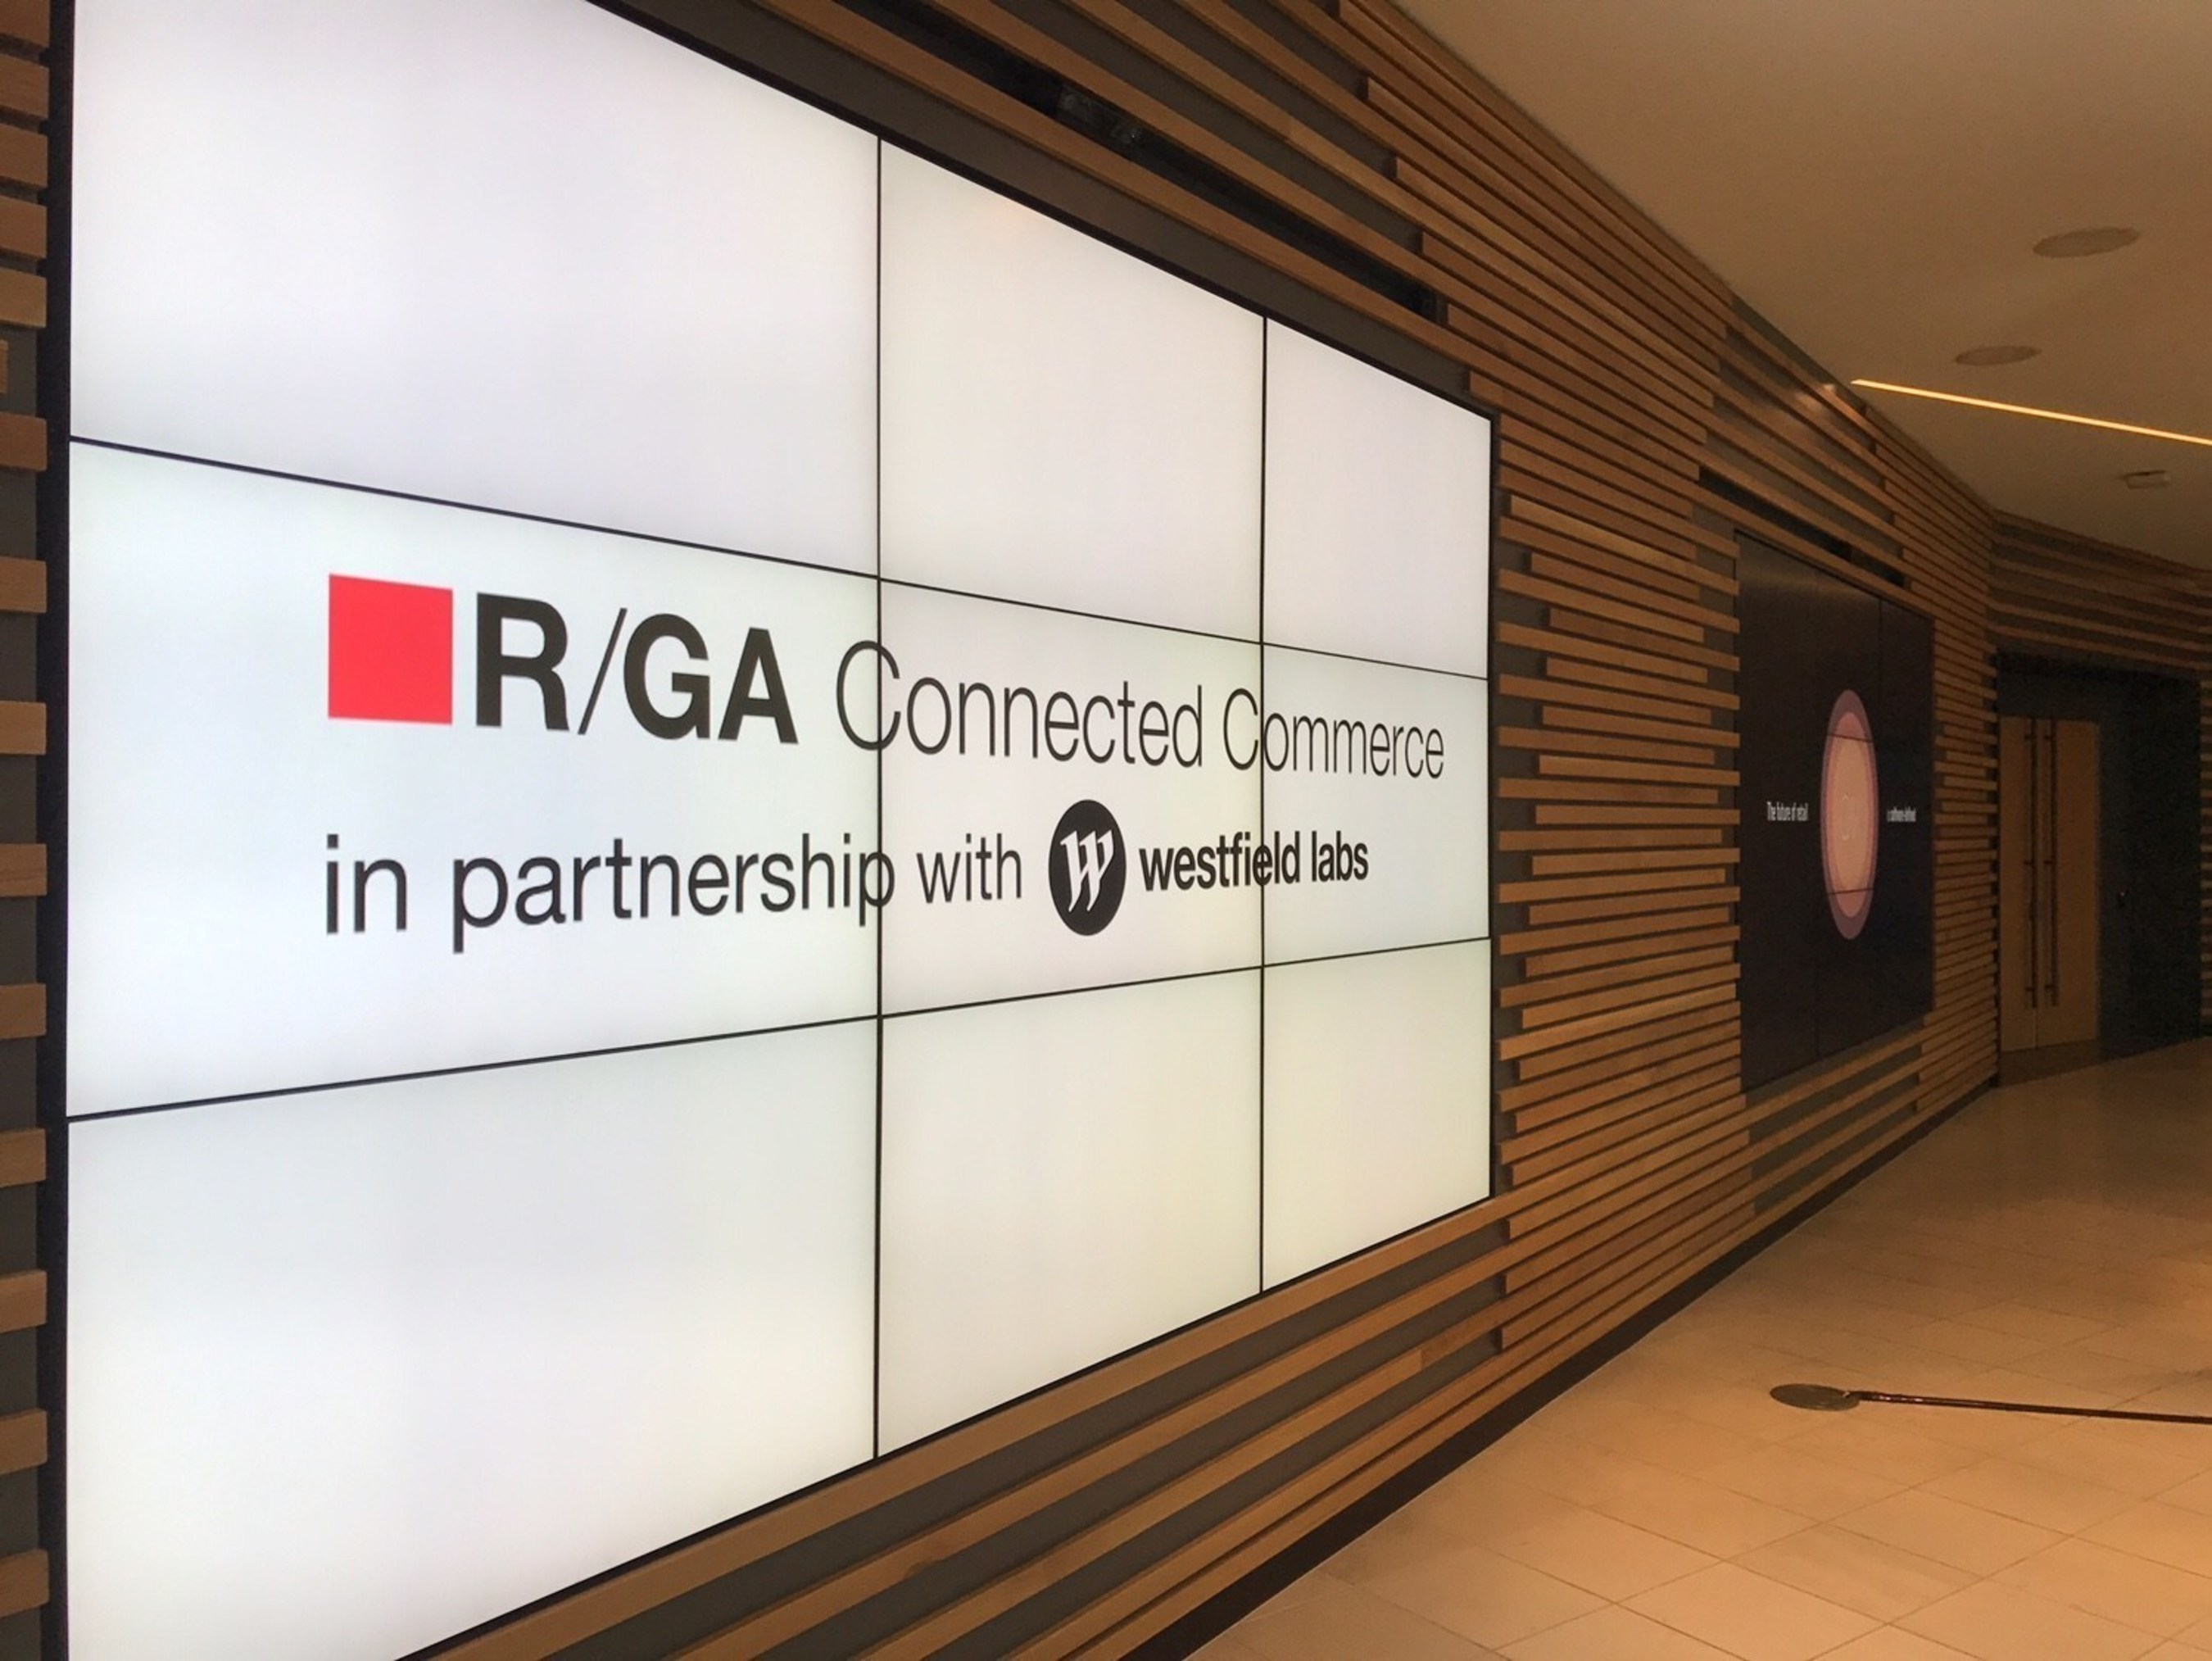 R/GA Ventures Connected Commerce Accelerator With Westfield Labs Concludes With Demo Event